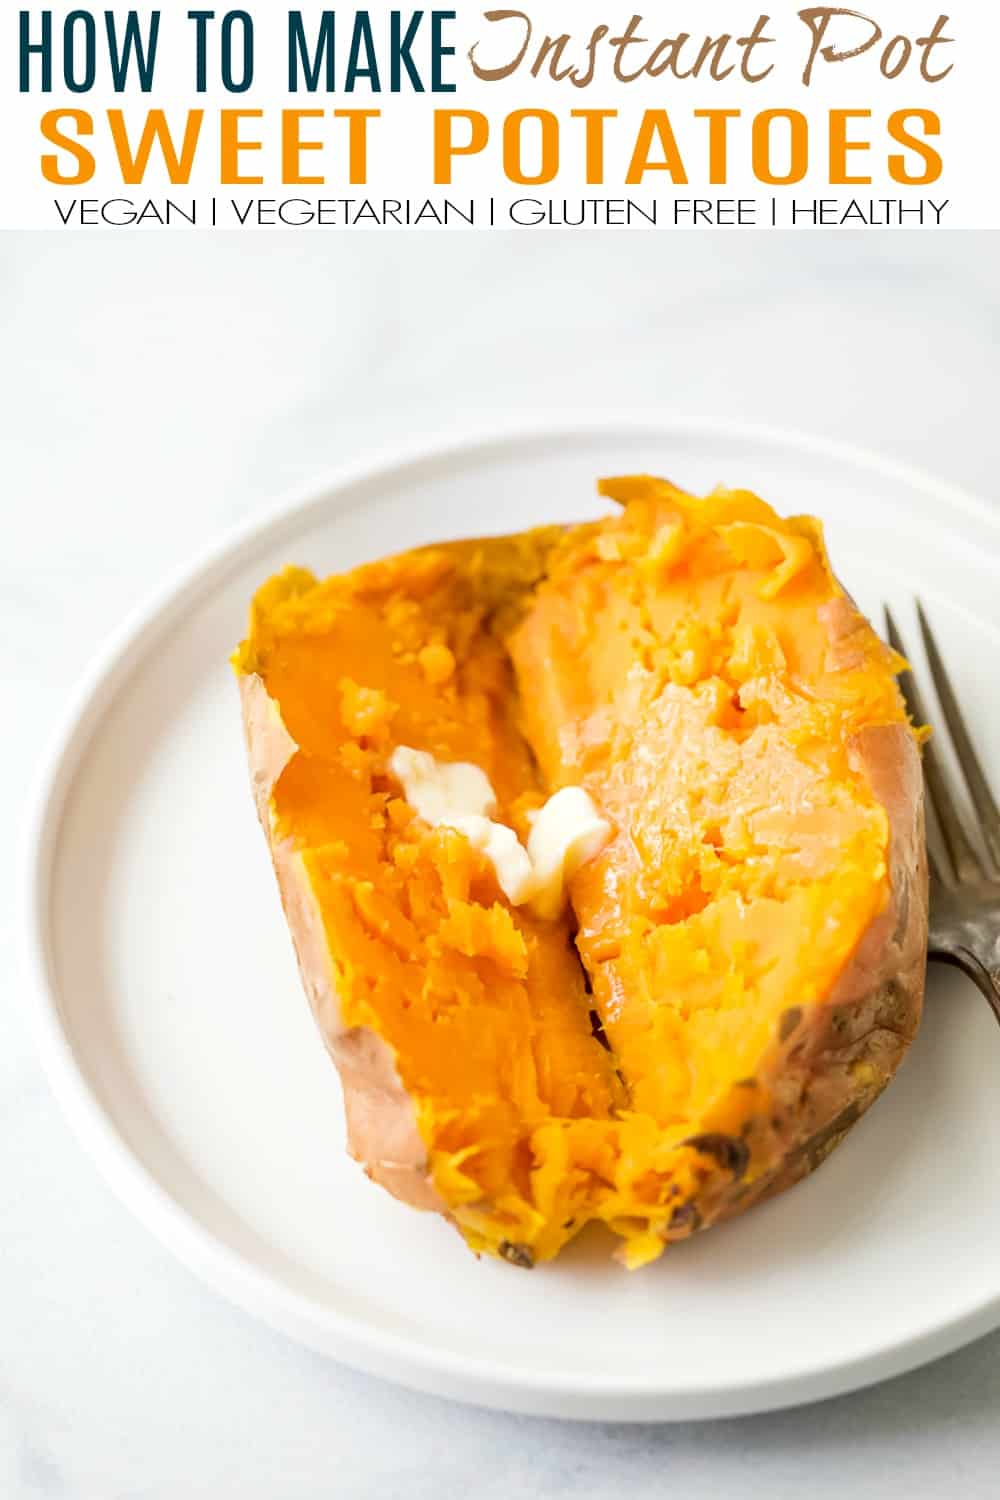 pinterest image for how to make instant pot sweet potatoes